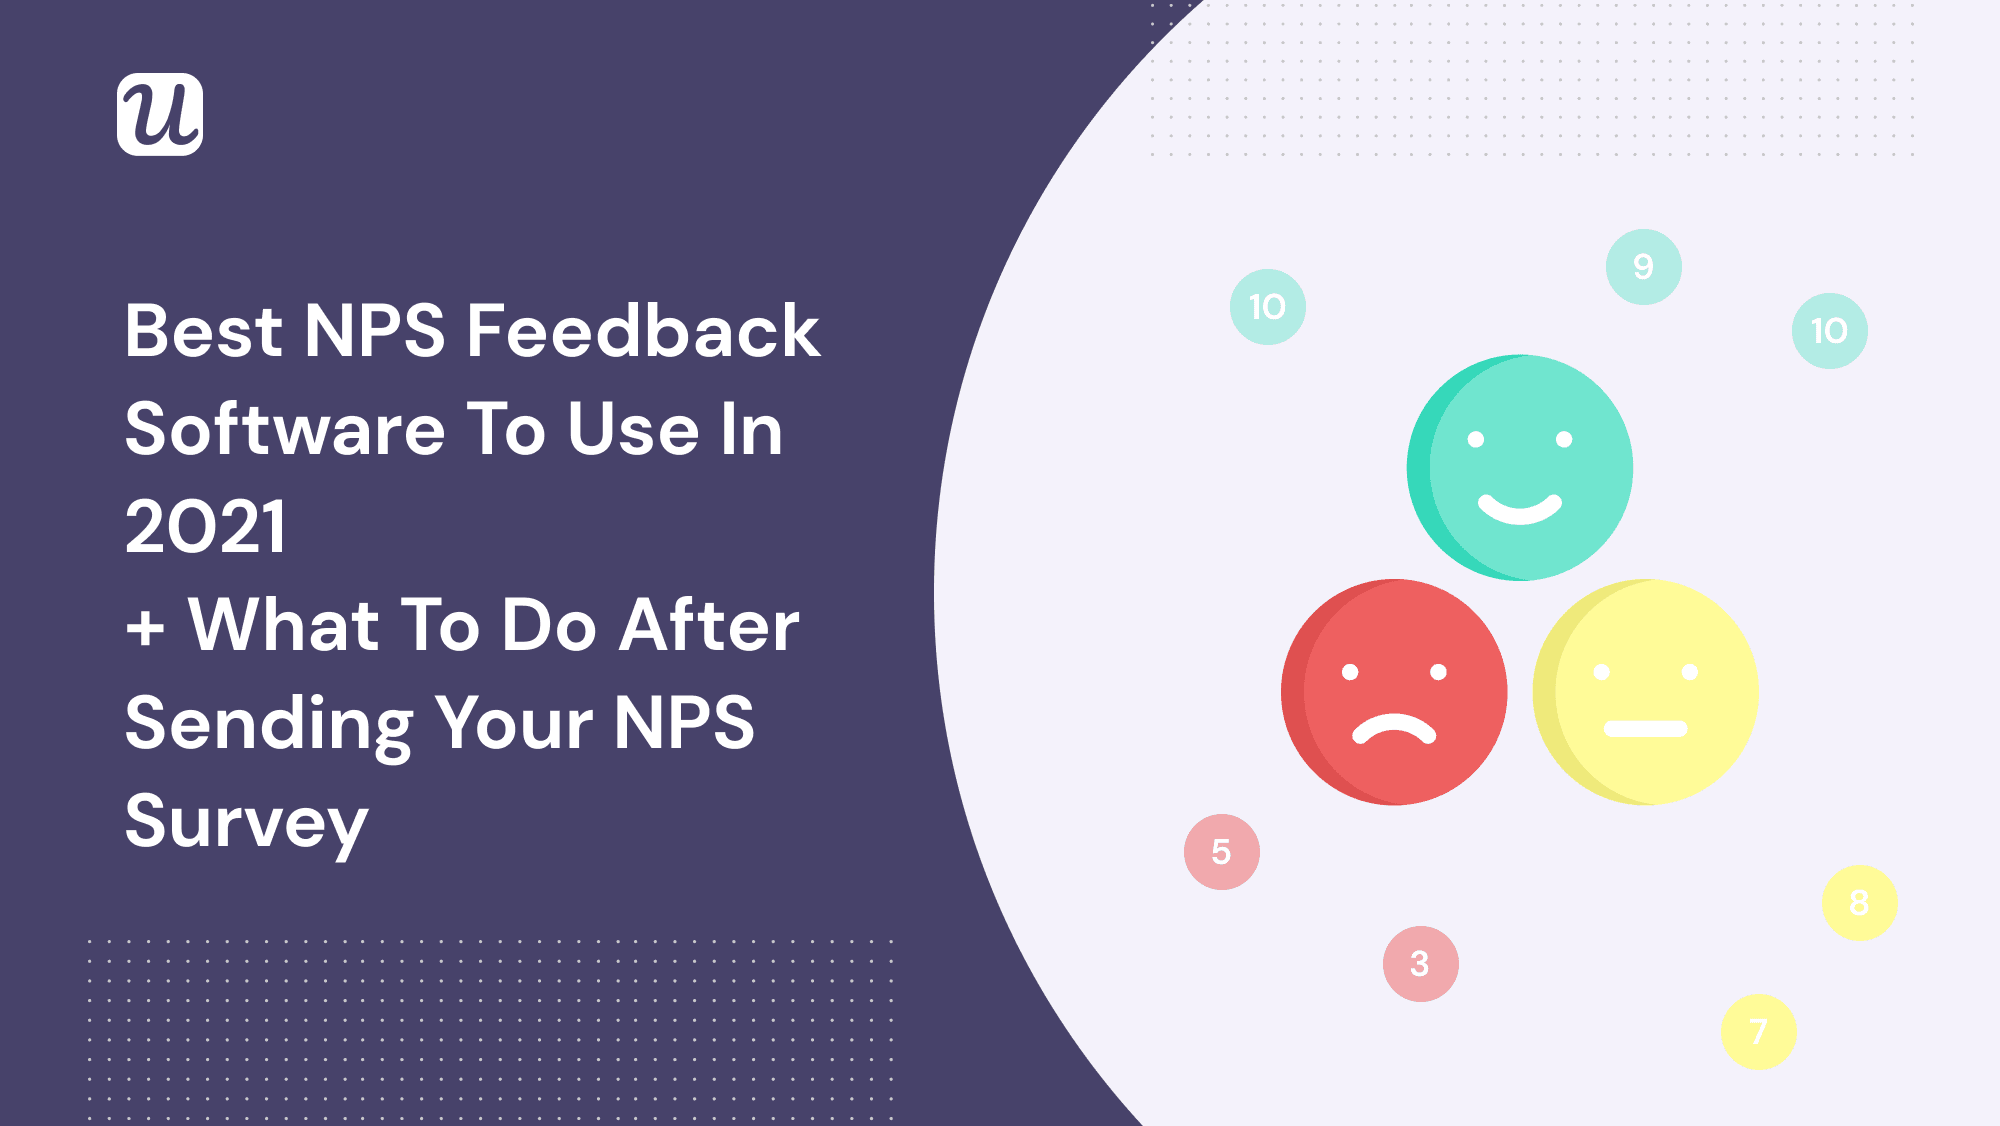 Best NPS Feedback Software to Use in 2021 [+ What to Do After Sending Your NPS Survey]